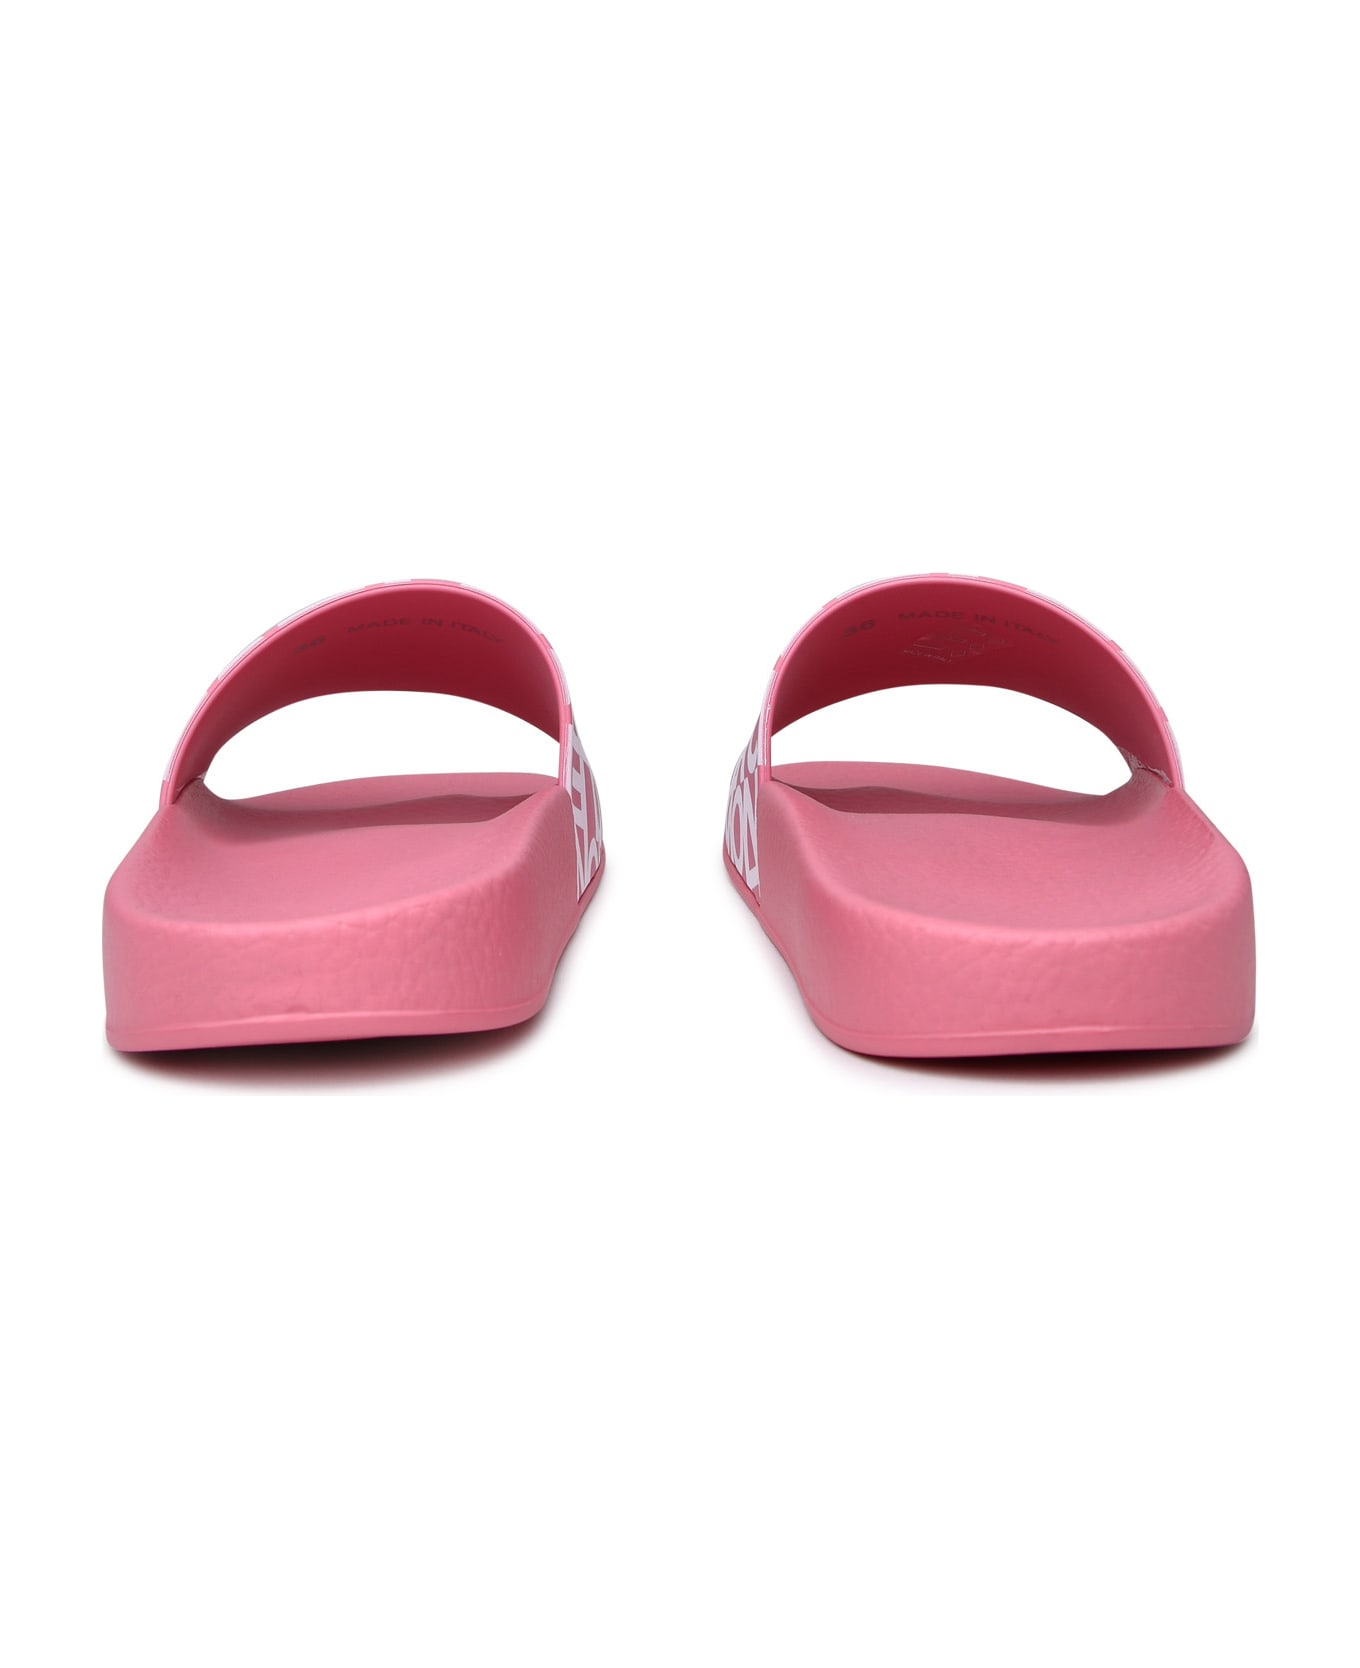 Moncler Jane Rose Rubber Slippers - Pink